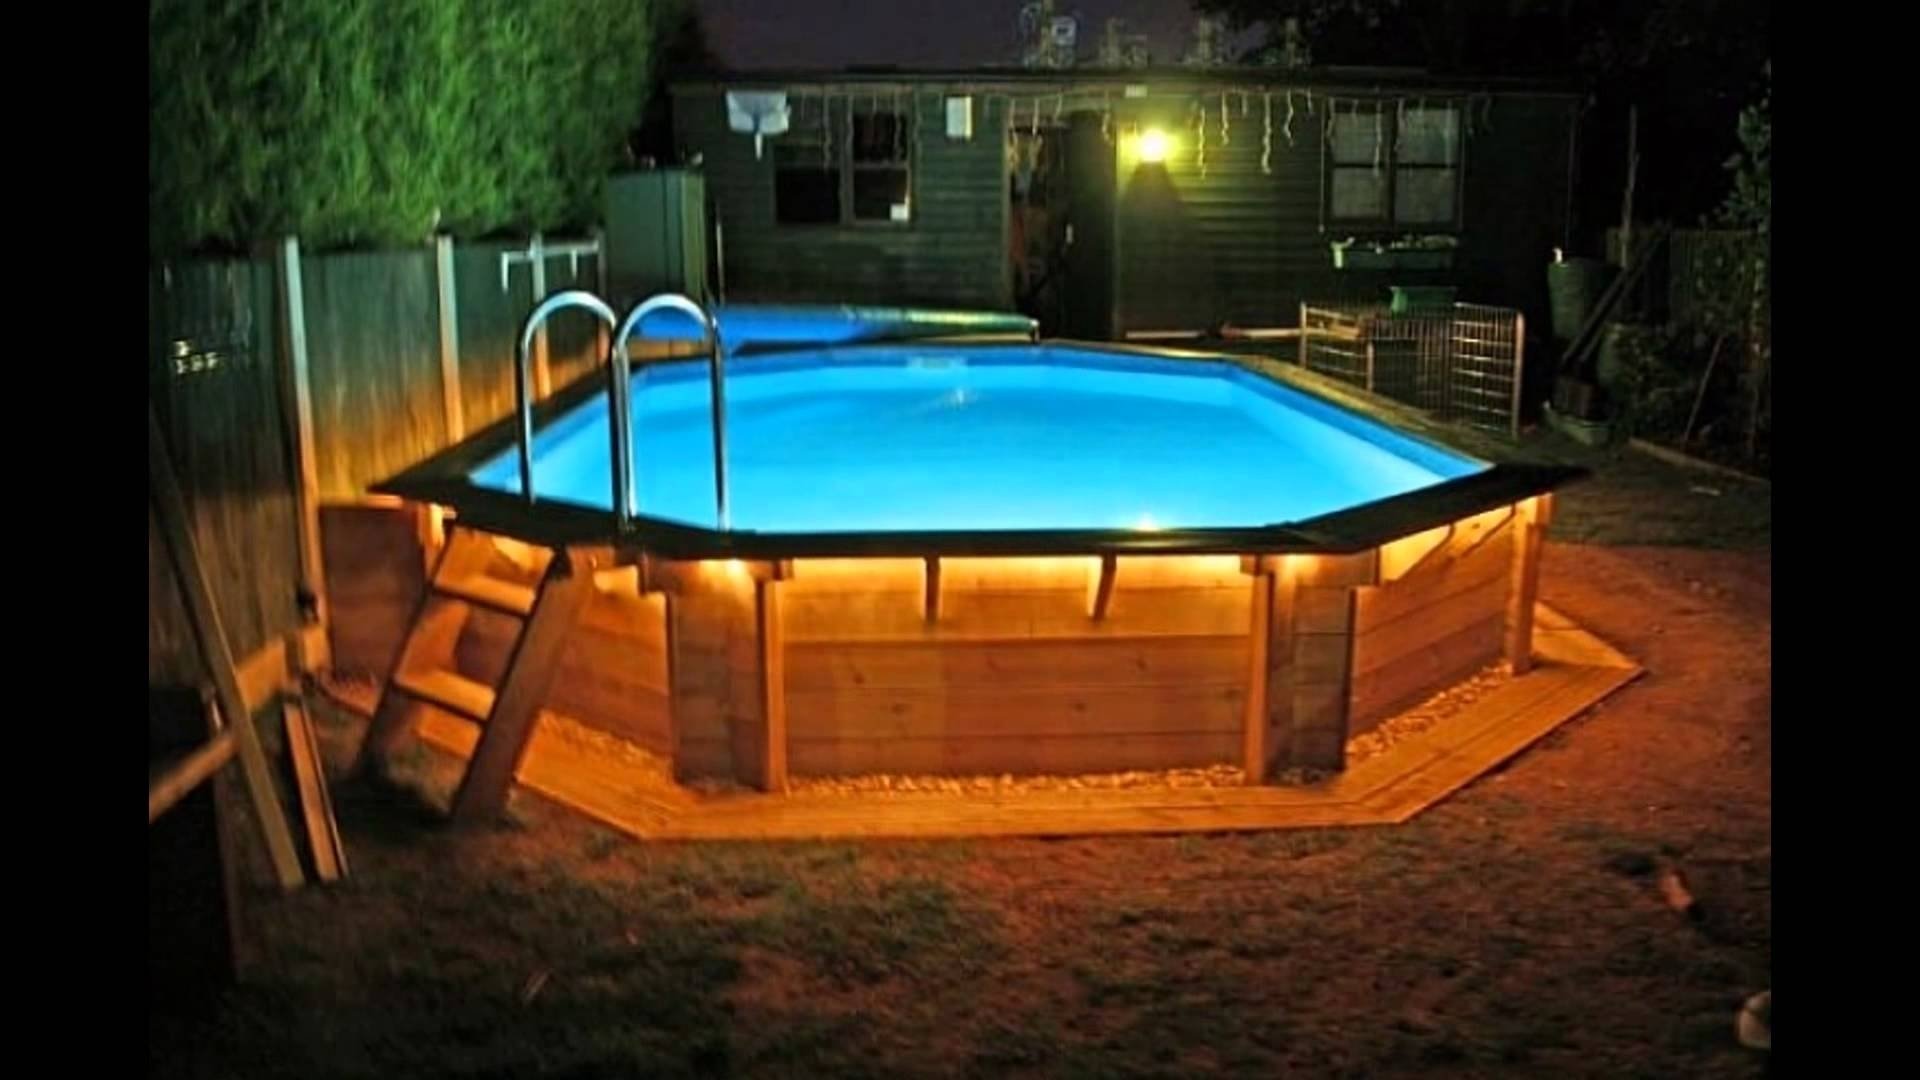 10 Stylish Pool Deck Ideas Above Ground above ground pool deck pictures ideas youtube 2 2022